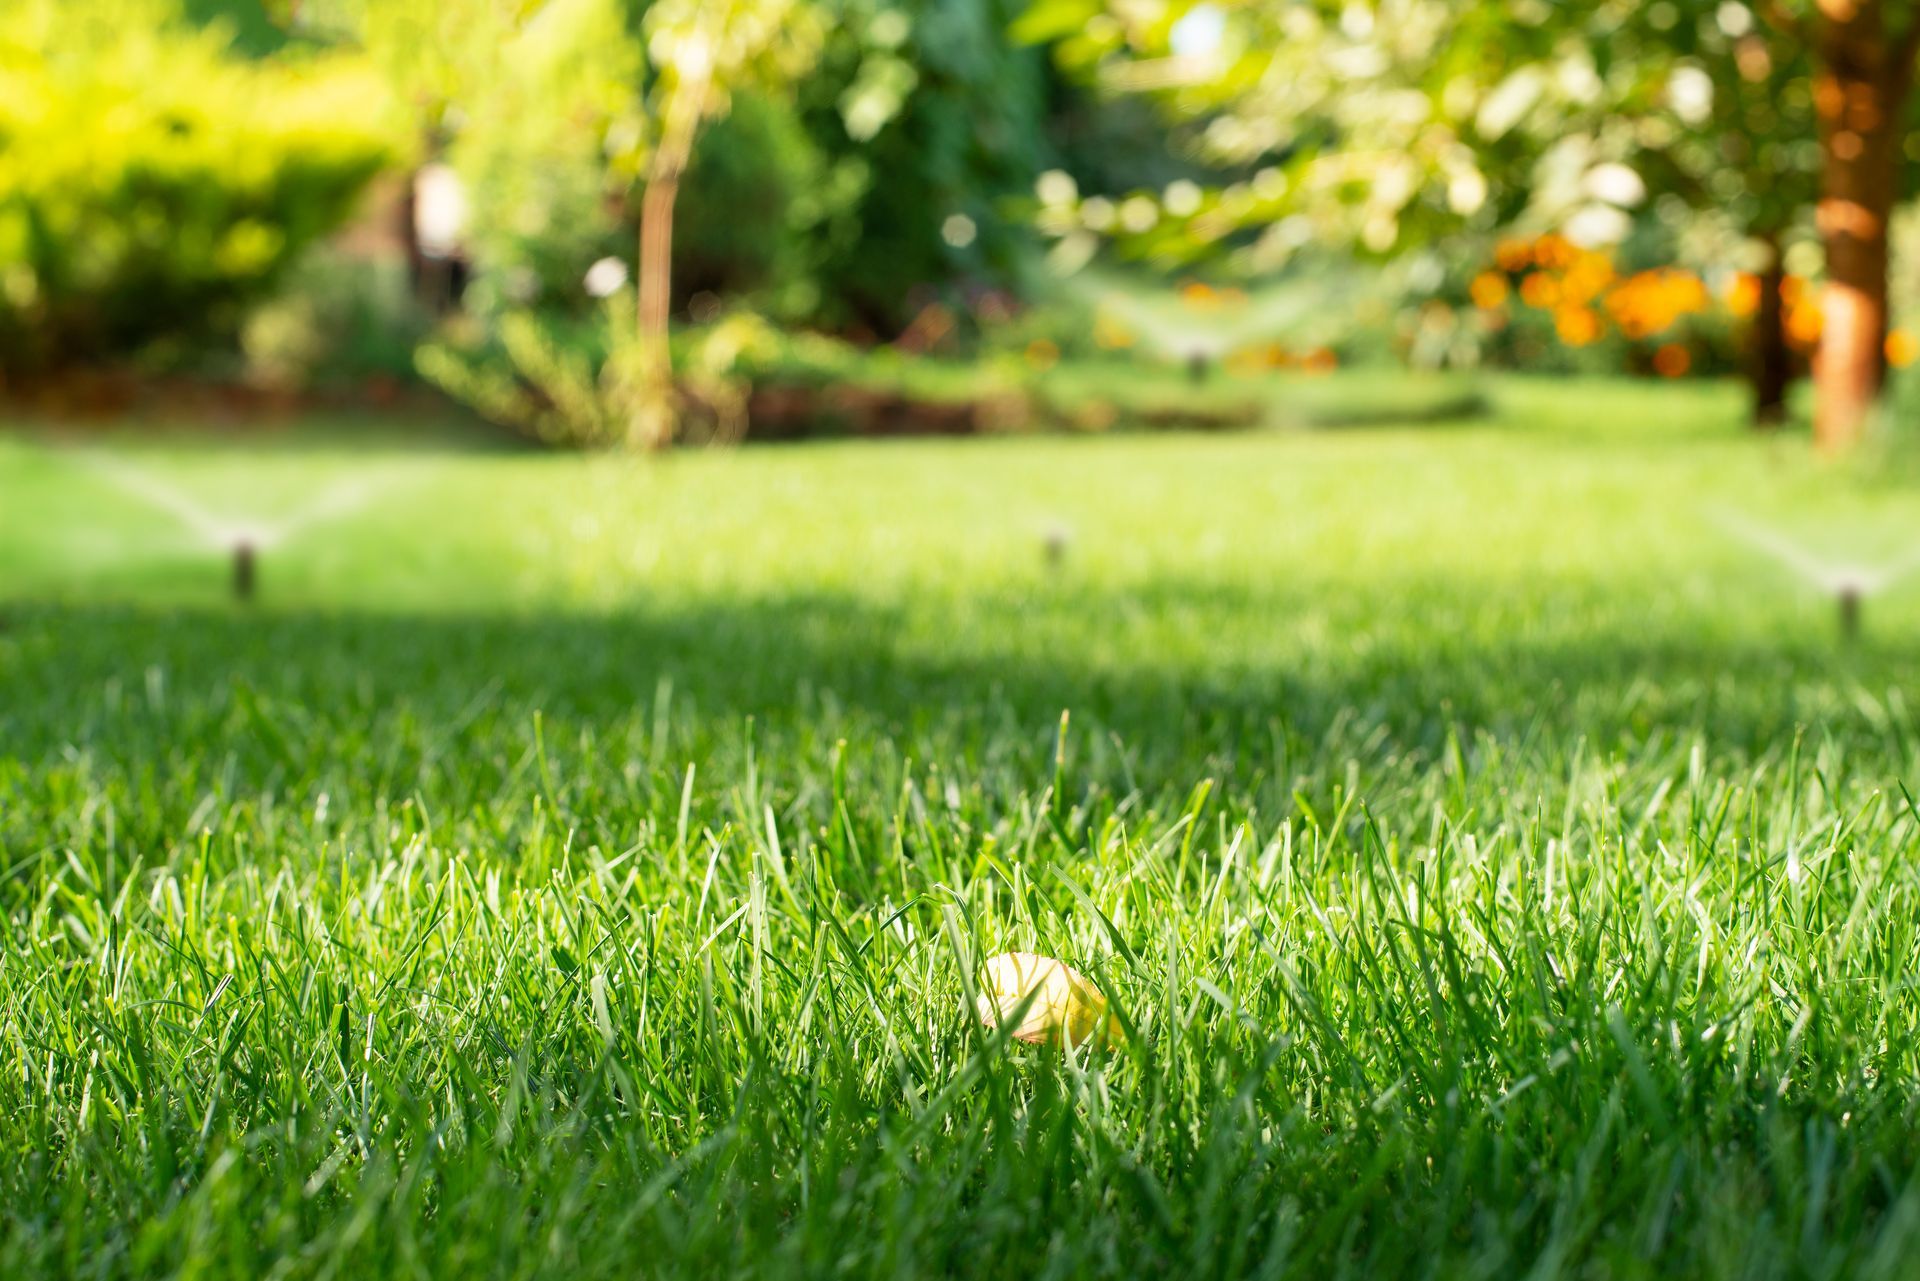 Boulder Creek Lawn & Landscape Always Provides Exceptional Lawn Care to Mid-MO Homeowners.